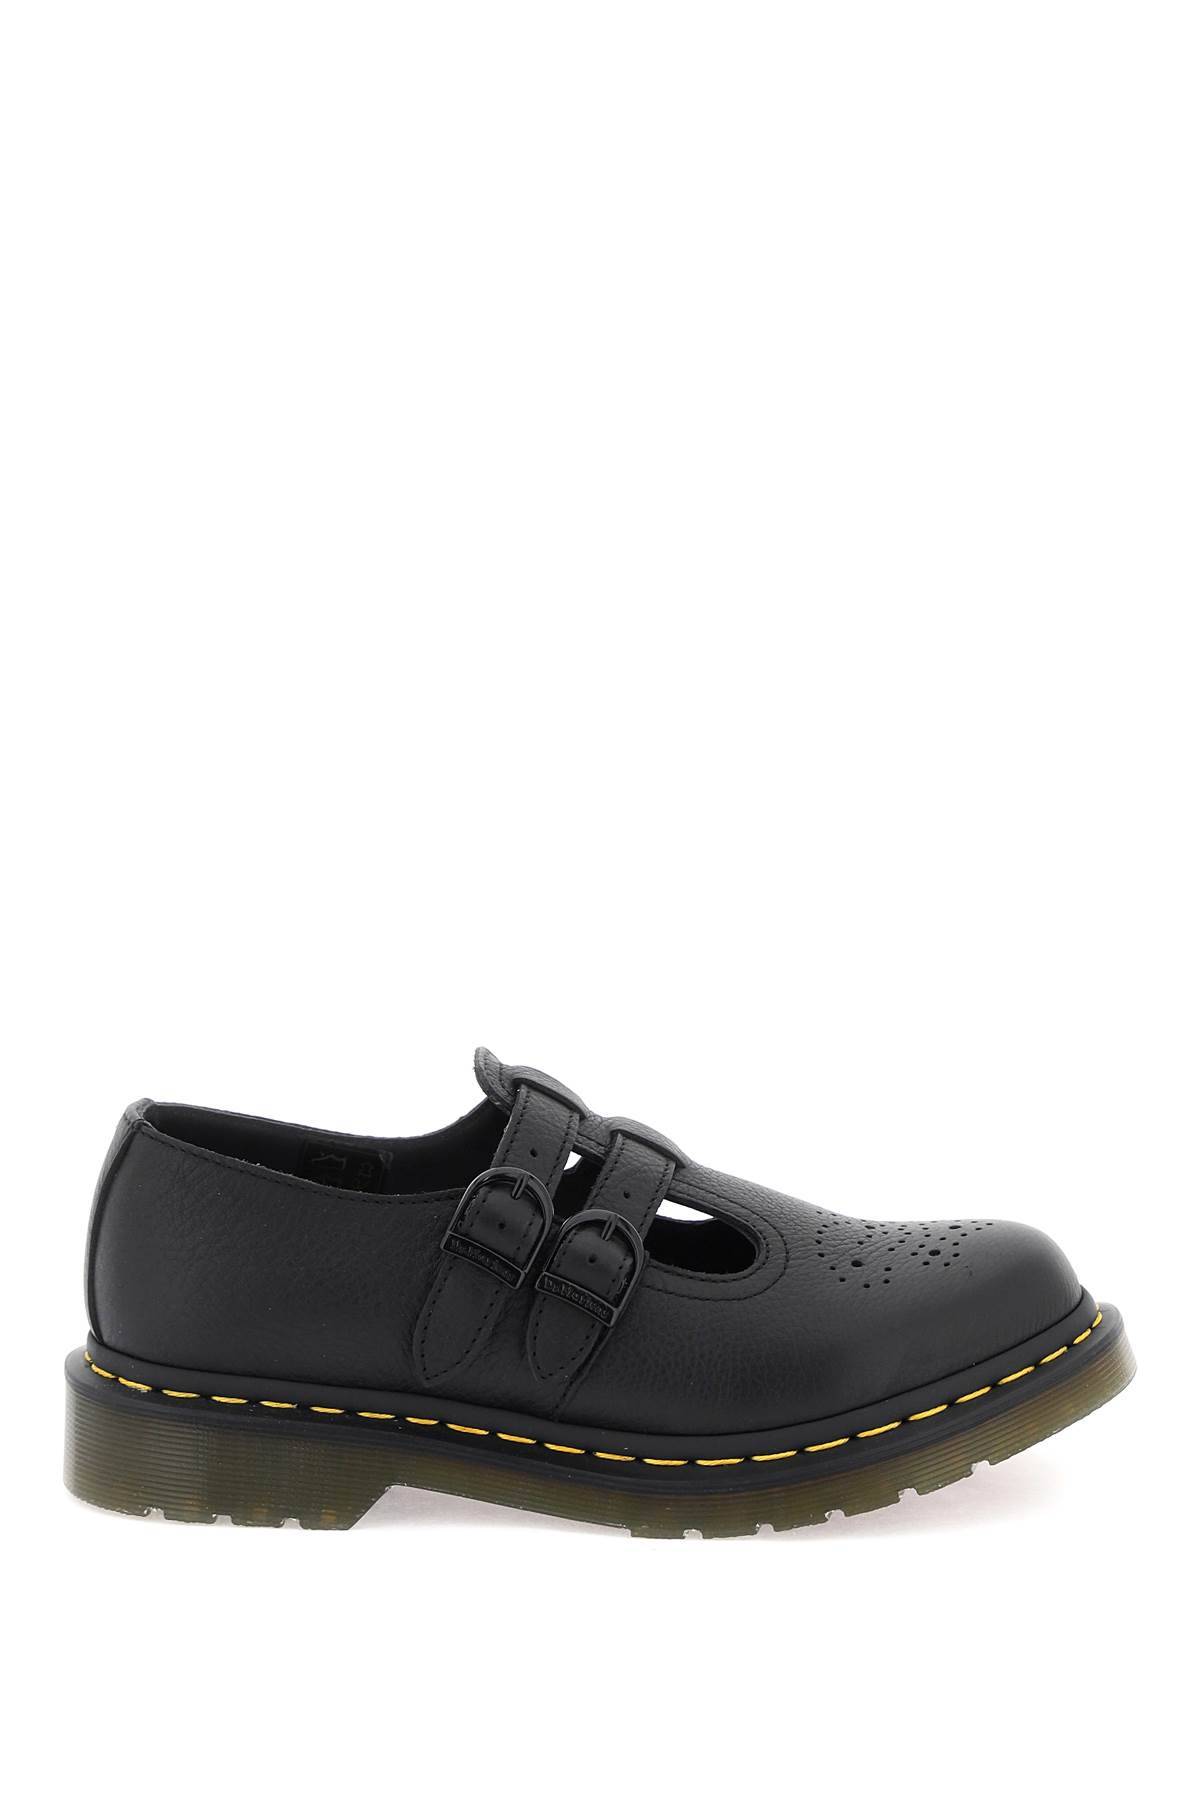 DR.MARTENS DR. MARTENS "leather virginia mary jane shoes